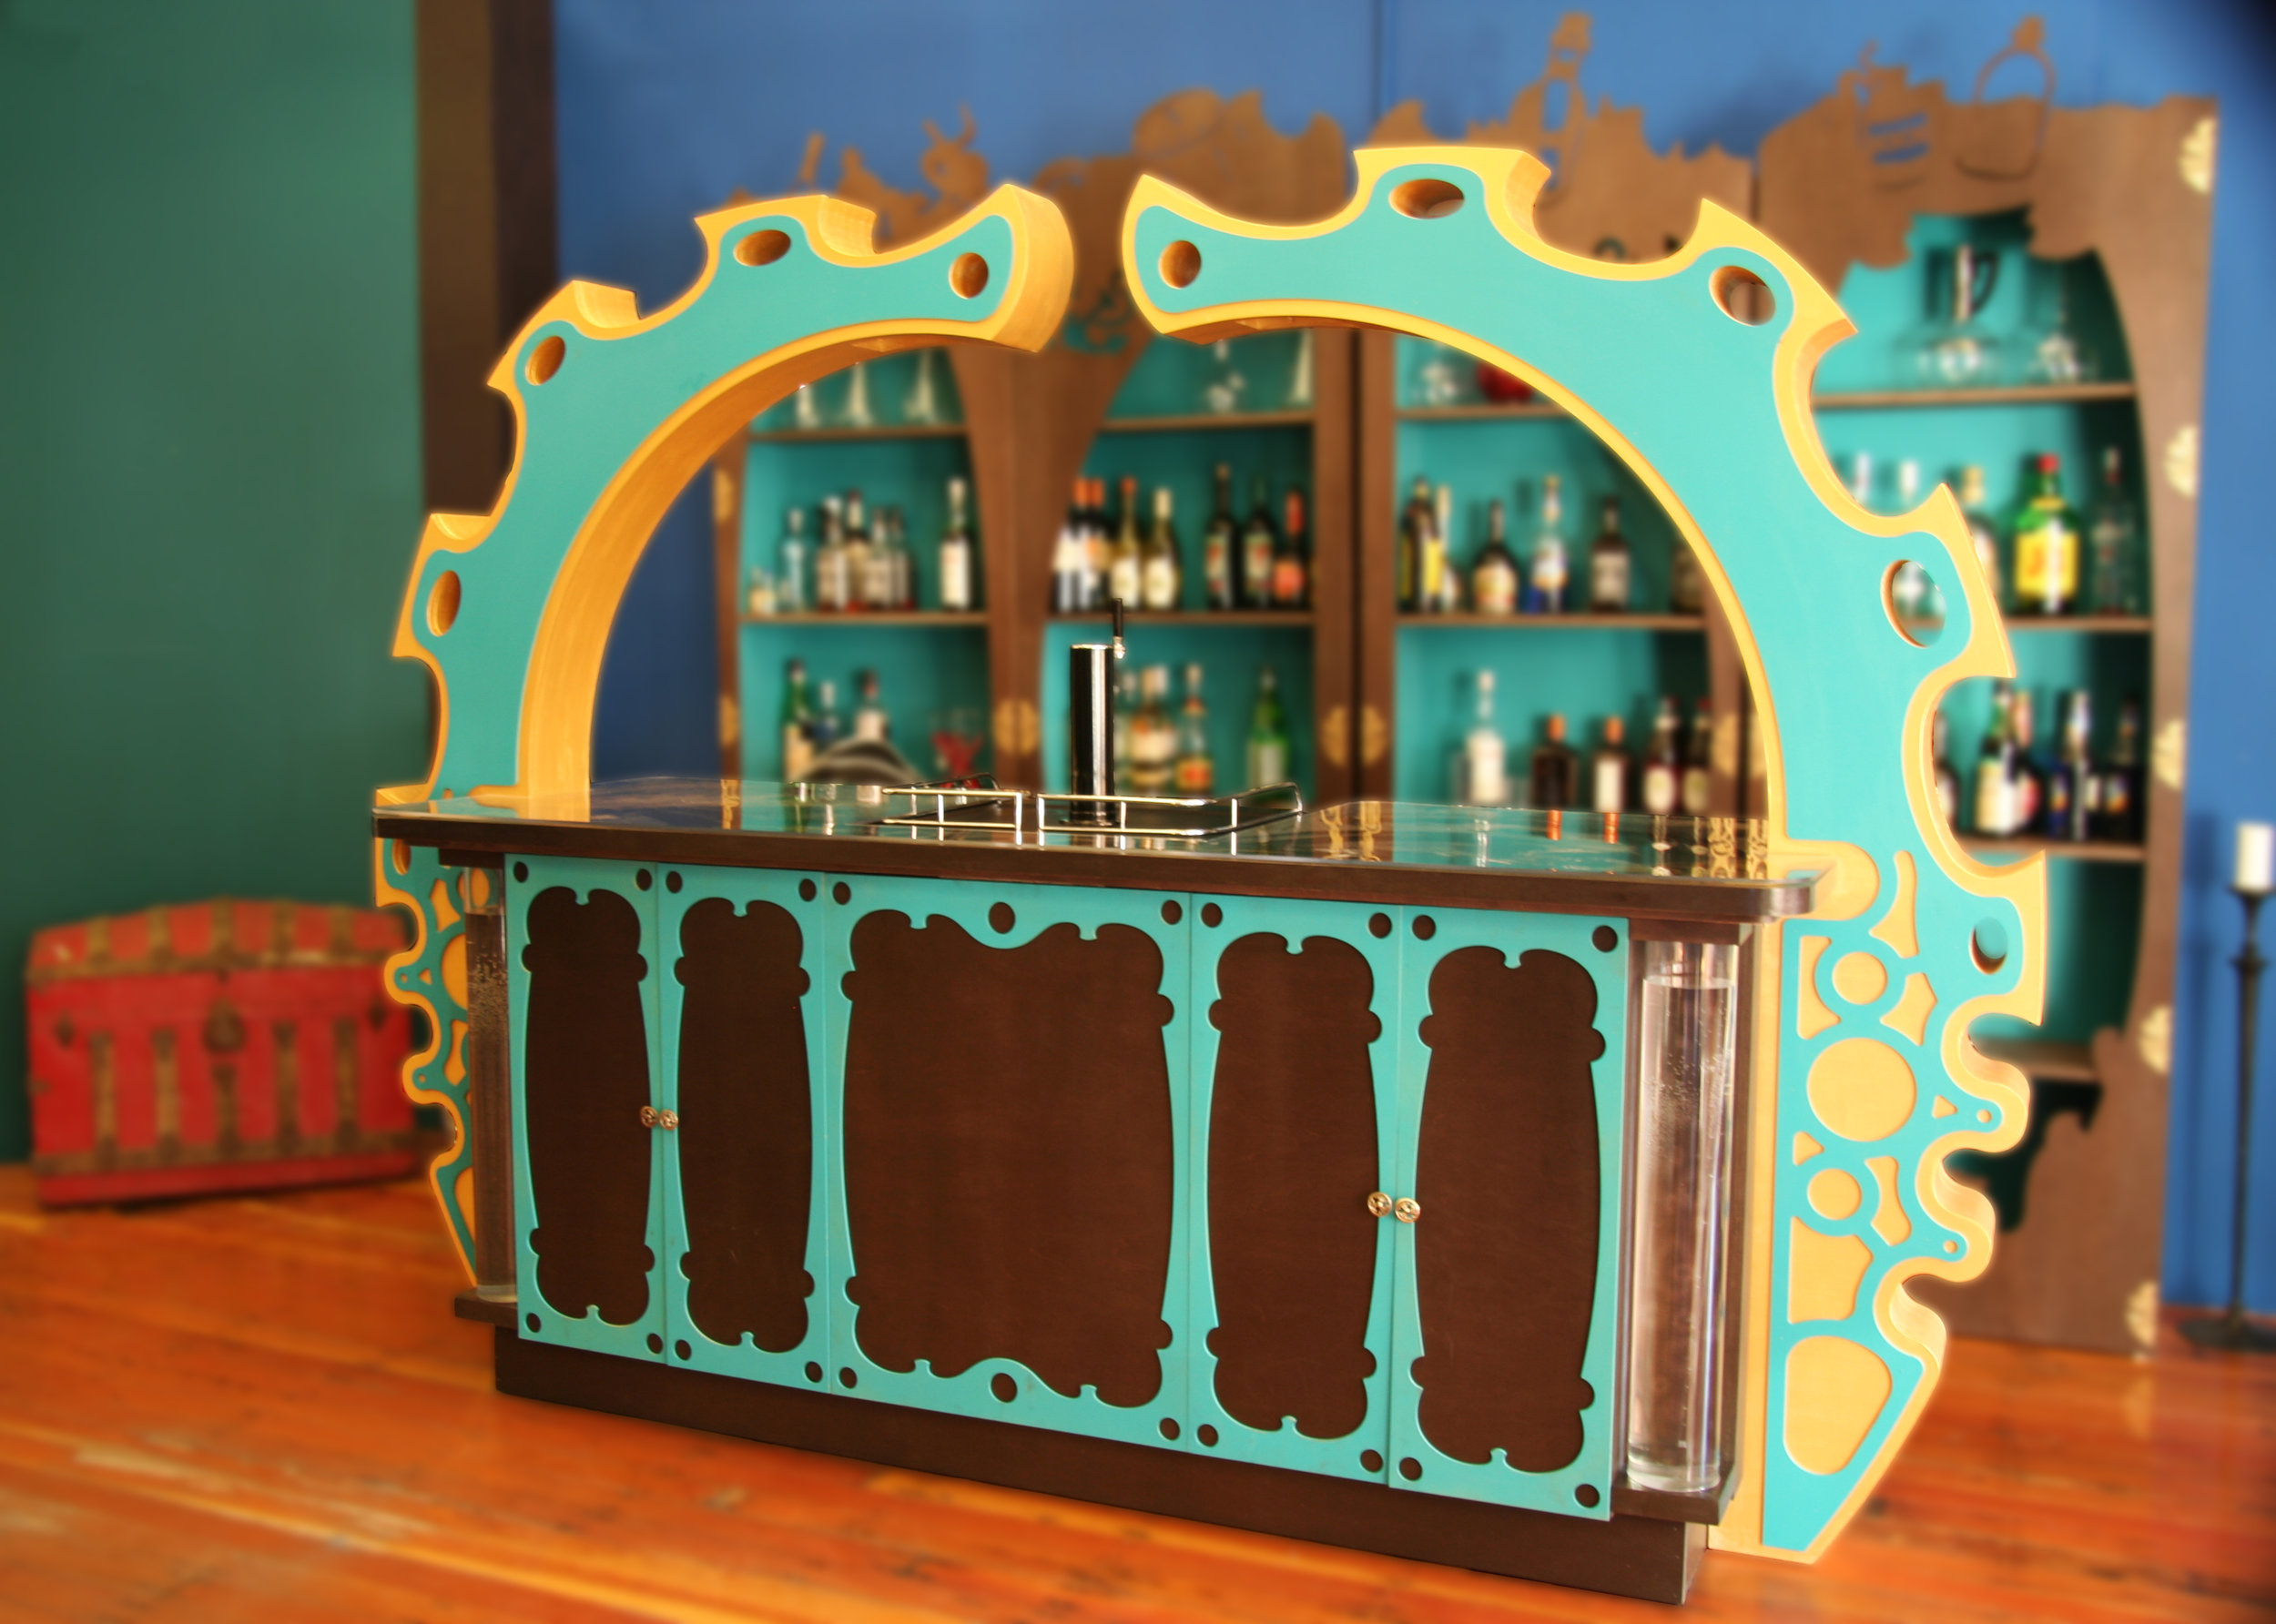  We designed this bar from the depths of our imaginations. We aimed for something cool and unique. 